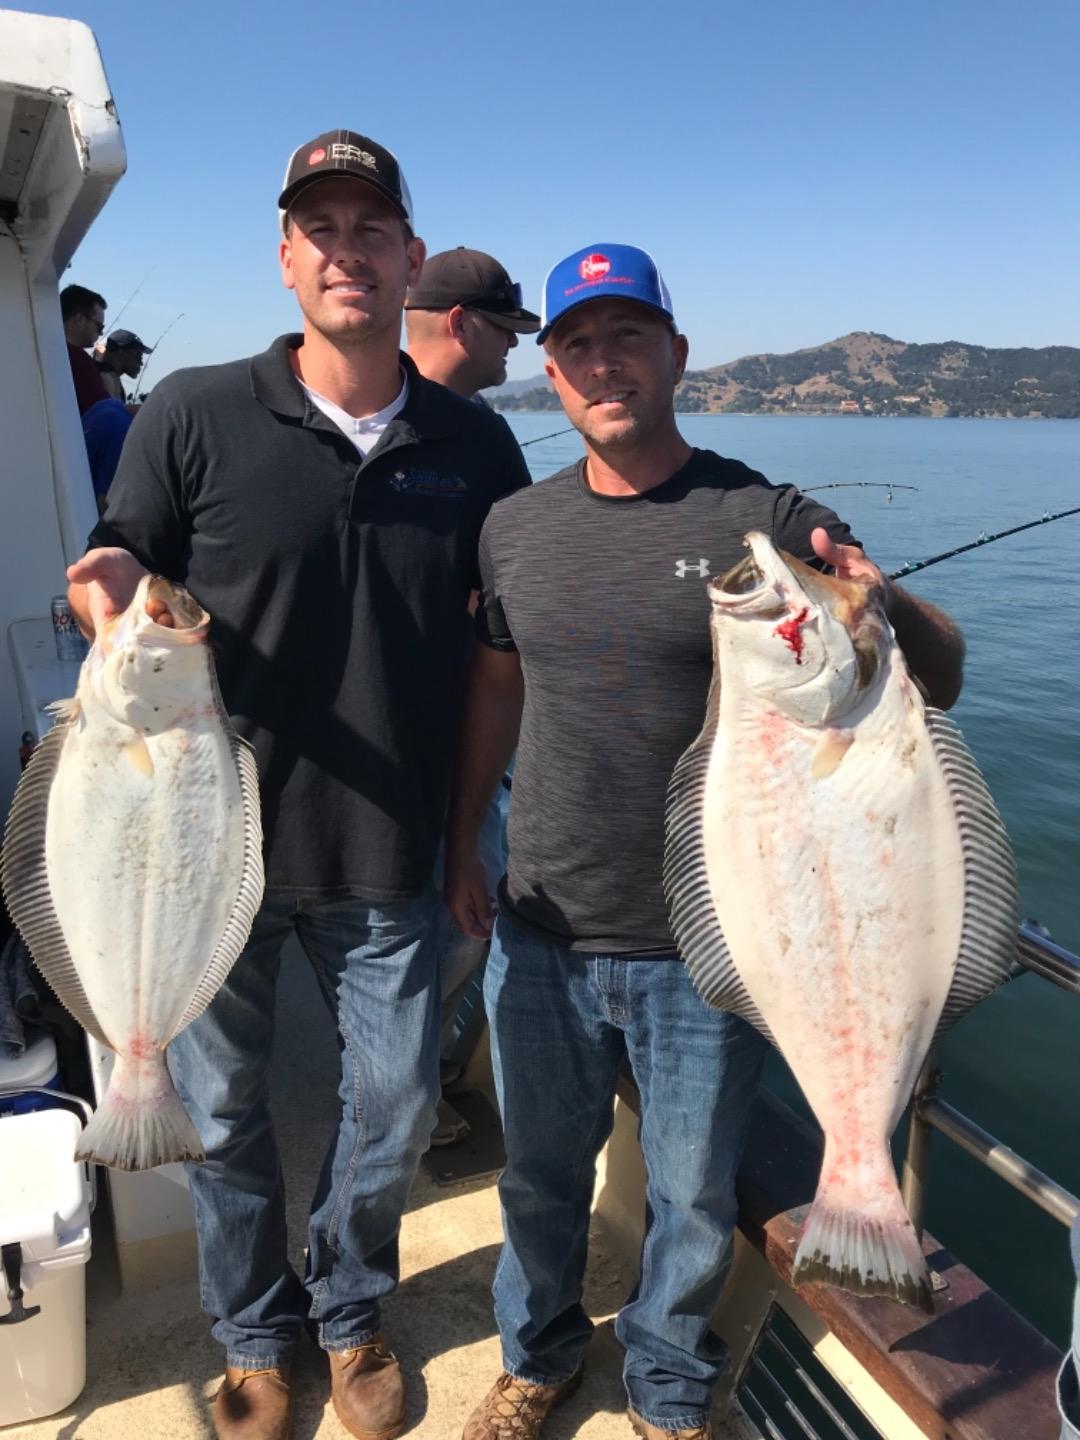 Great action in the bayHad a excellent day in the bay today. Fished a wide open striped bass bite in the morning and landed 32 halibut for o